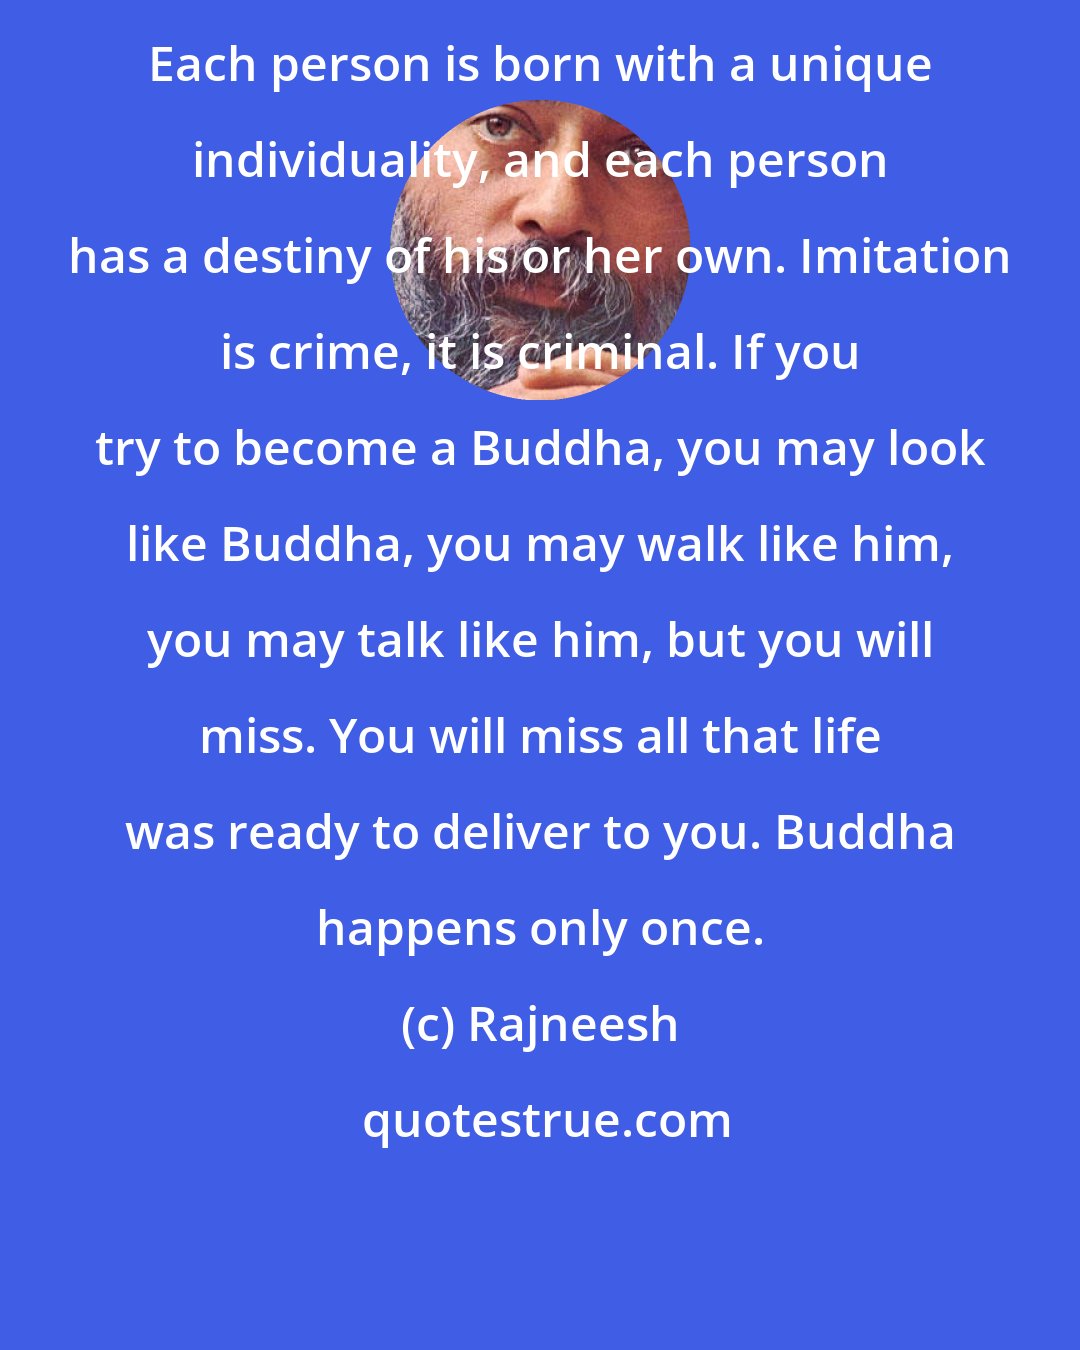 Rajneesh: Each person is born with a unique individuality, and each person has a destiny of his or her own. Imitation is crime, it is criminal. If you try to become a Buddha, you may look like Buddha, you may walk like him, you may talk like him, but you will miss. You will miss all that life was ready to deliver to you. Buddha happens only once.